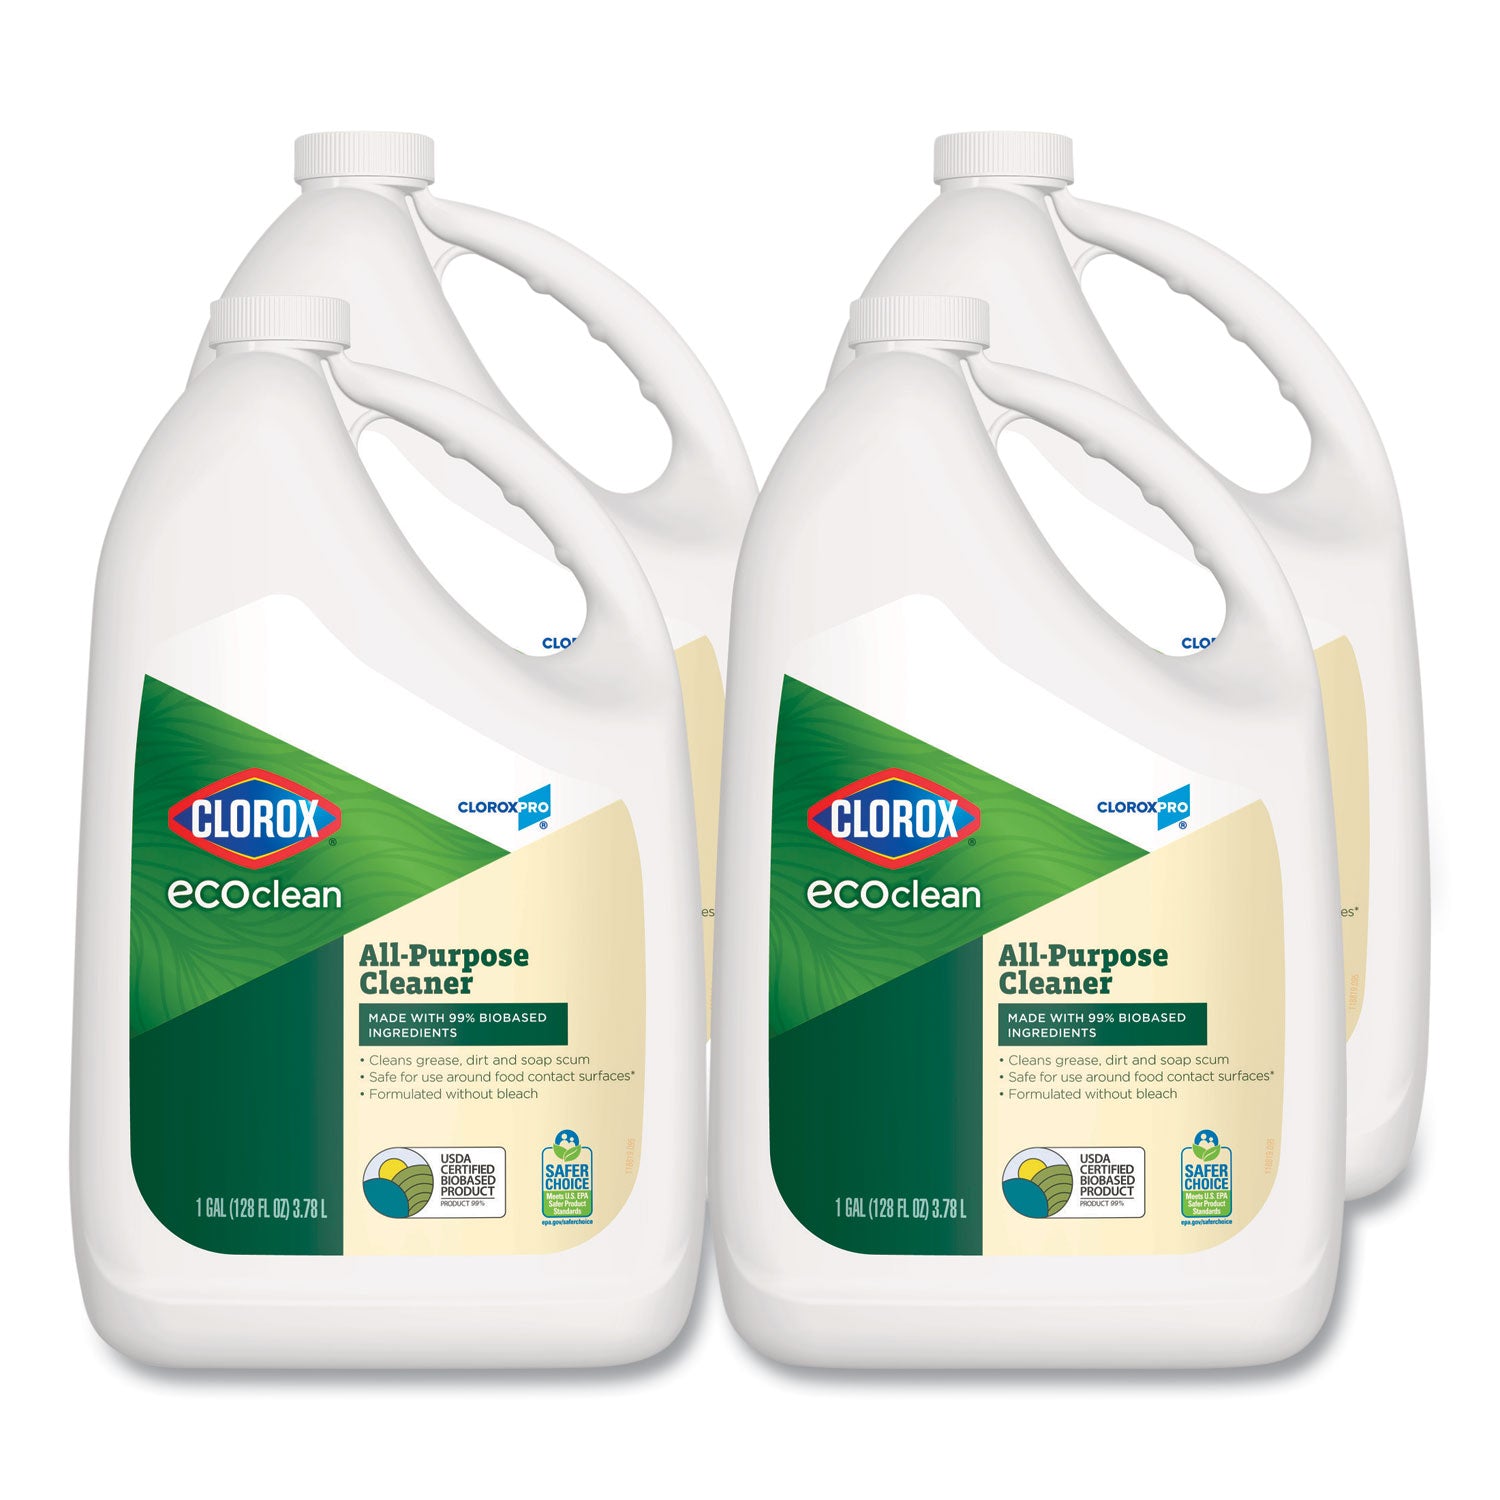 clorox-pro-ecoclean-all-purpose-cleaner-unscented-128-oz-bottle-4-carton_clo60278ct - 1